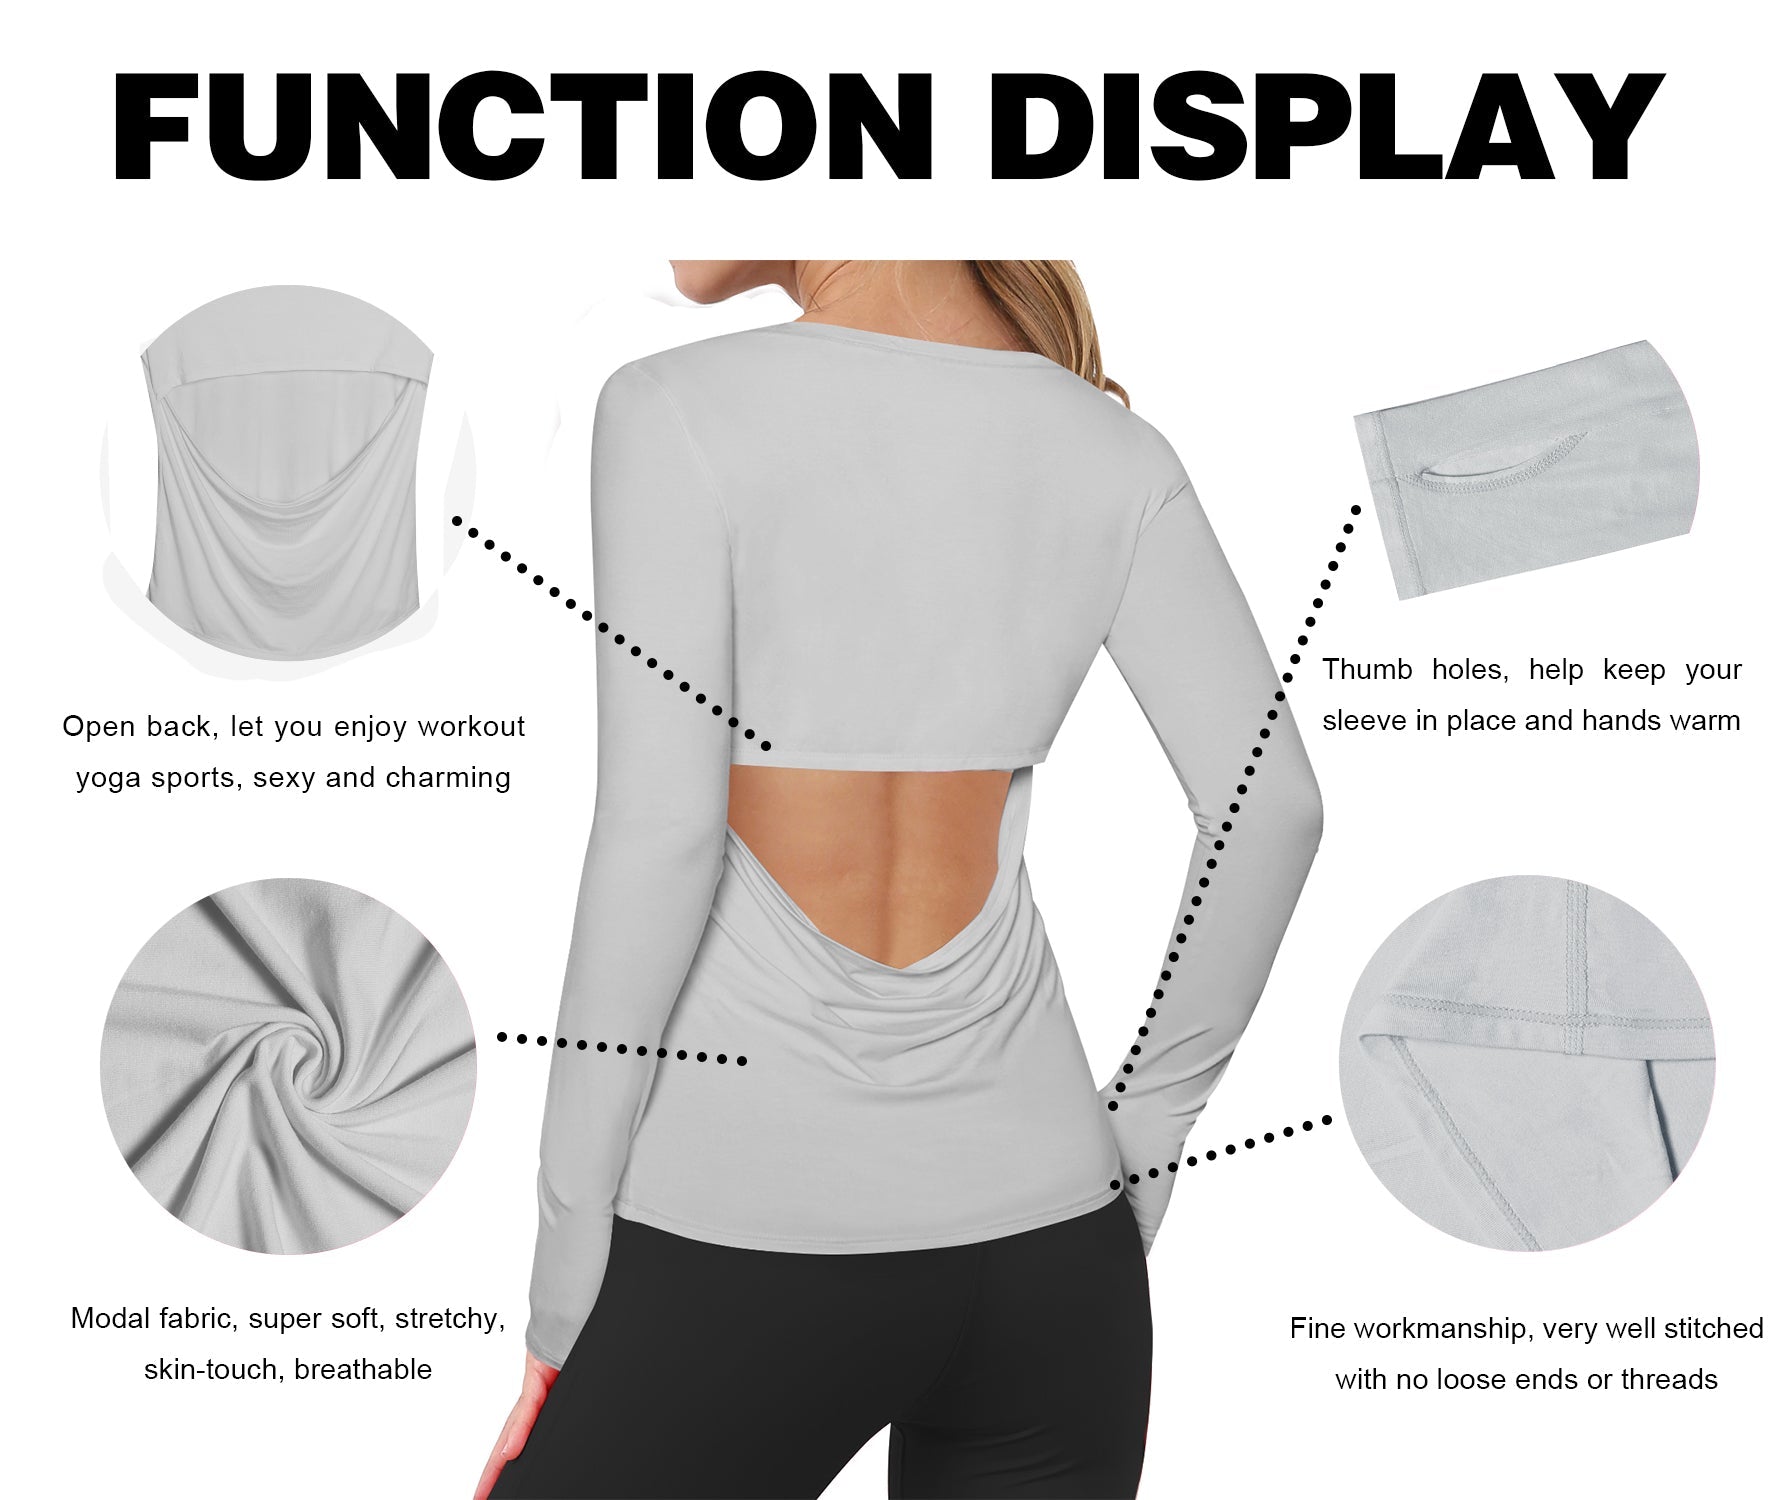 Open Back Long Sleeve Tops lightgray Designed for On the Move Slim fit 93%Modal/7%Spandex Four-way stretch Naturally breathable Super-Soft, Modal Fabric